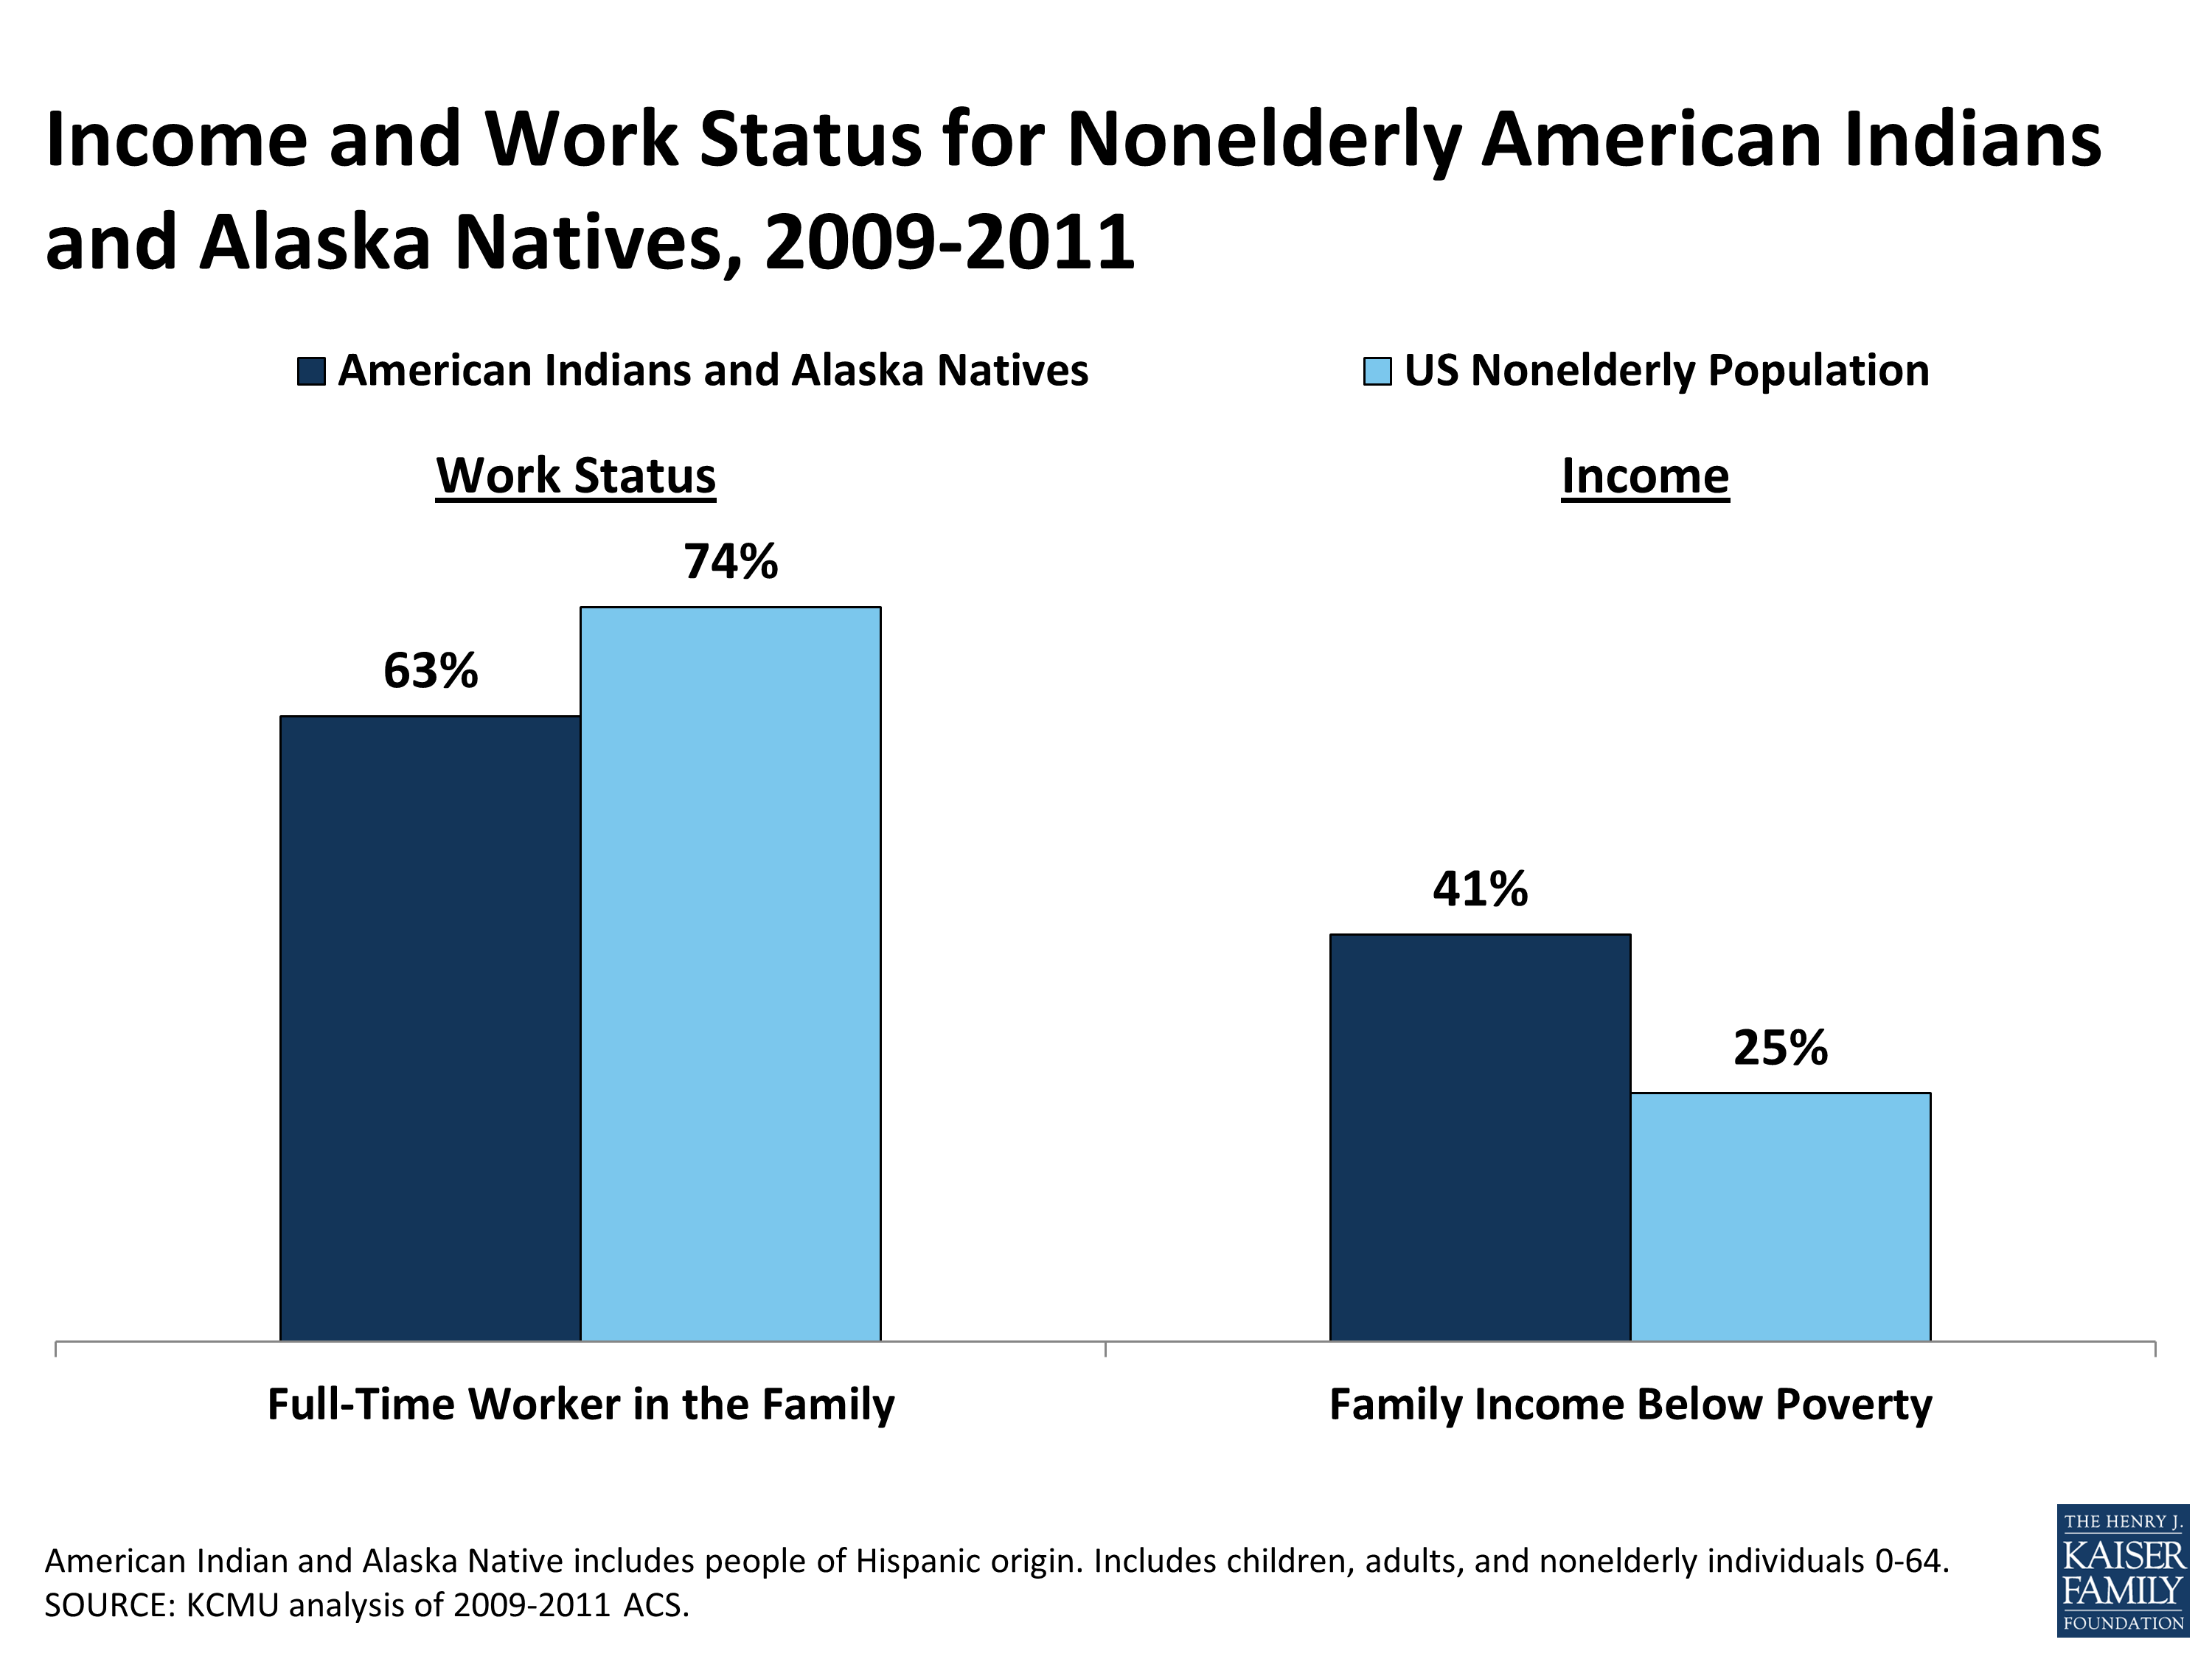 Health Coverage And Care For American Indians And Alaska Natives Kff